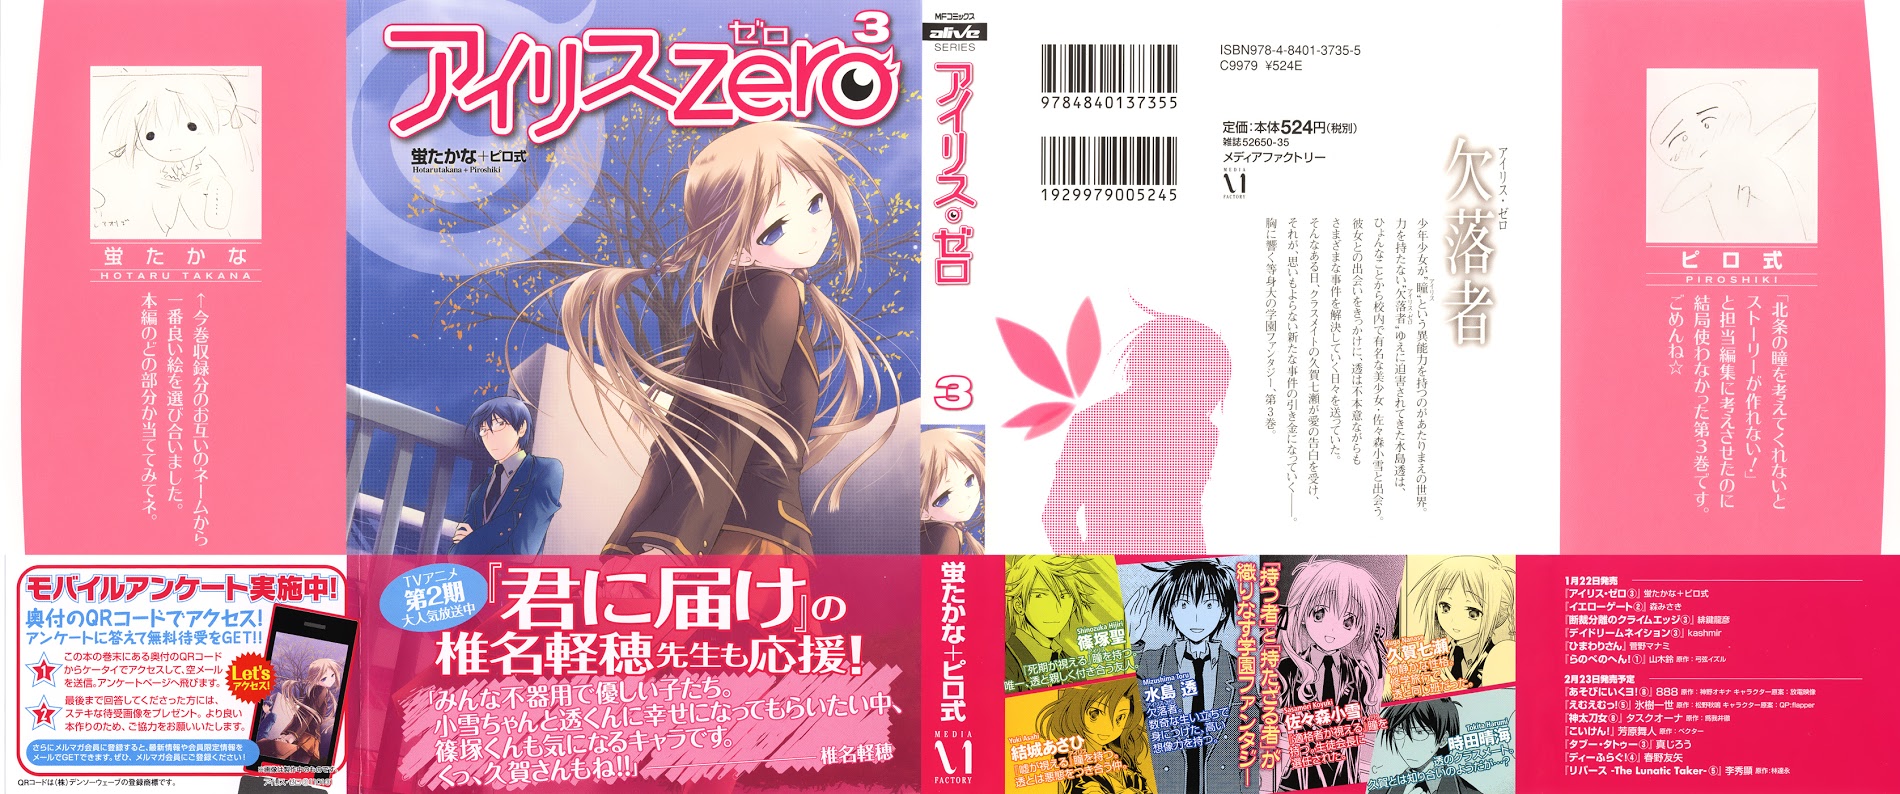 Iris Zero Vol.3 Chapter 10 : Episode 10 - Things You Saw Coming - Picture 2